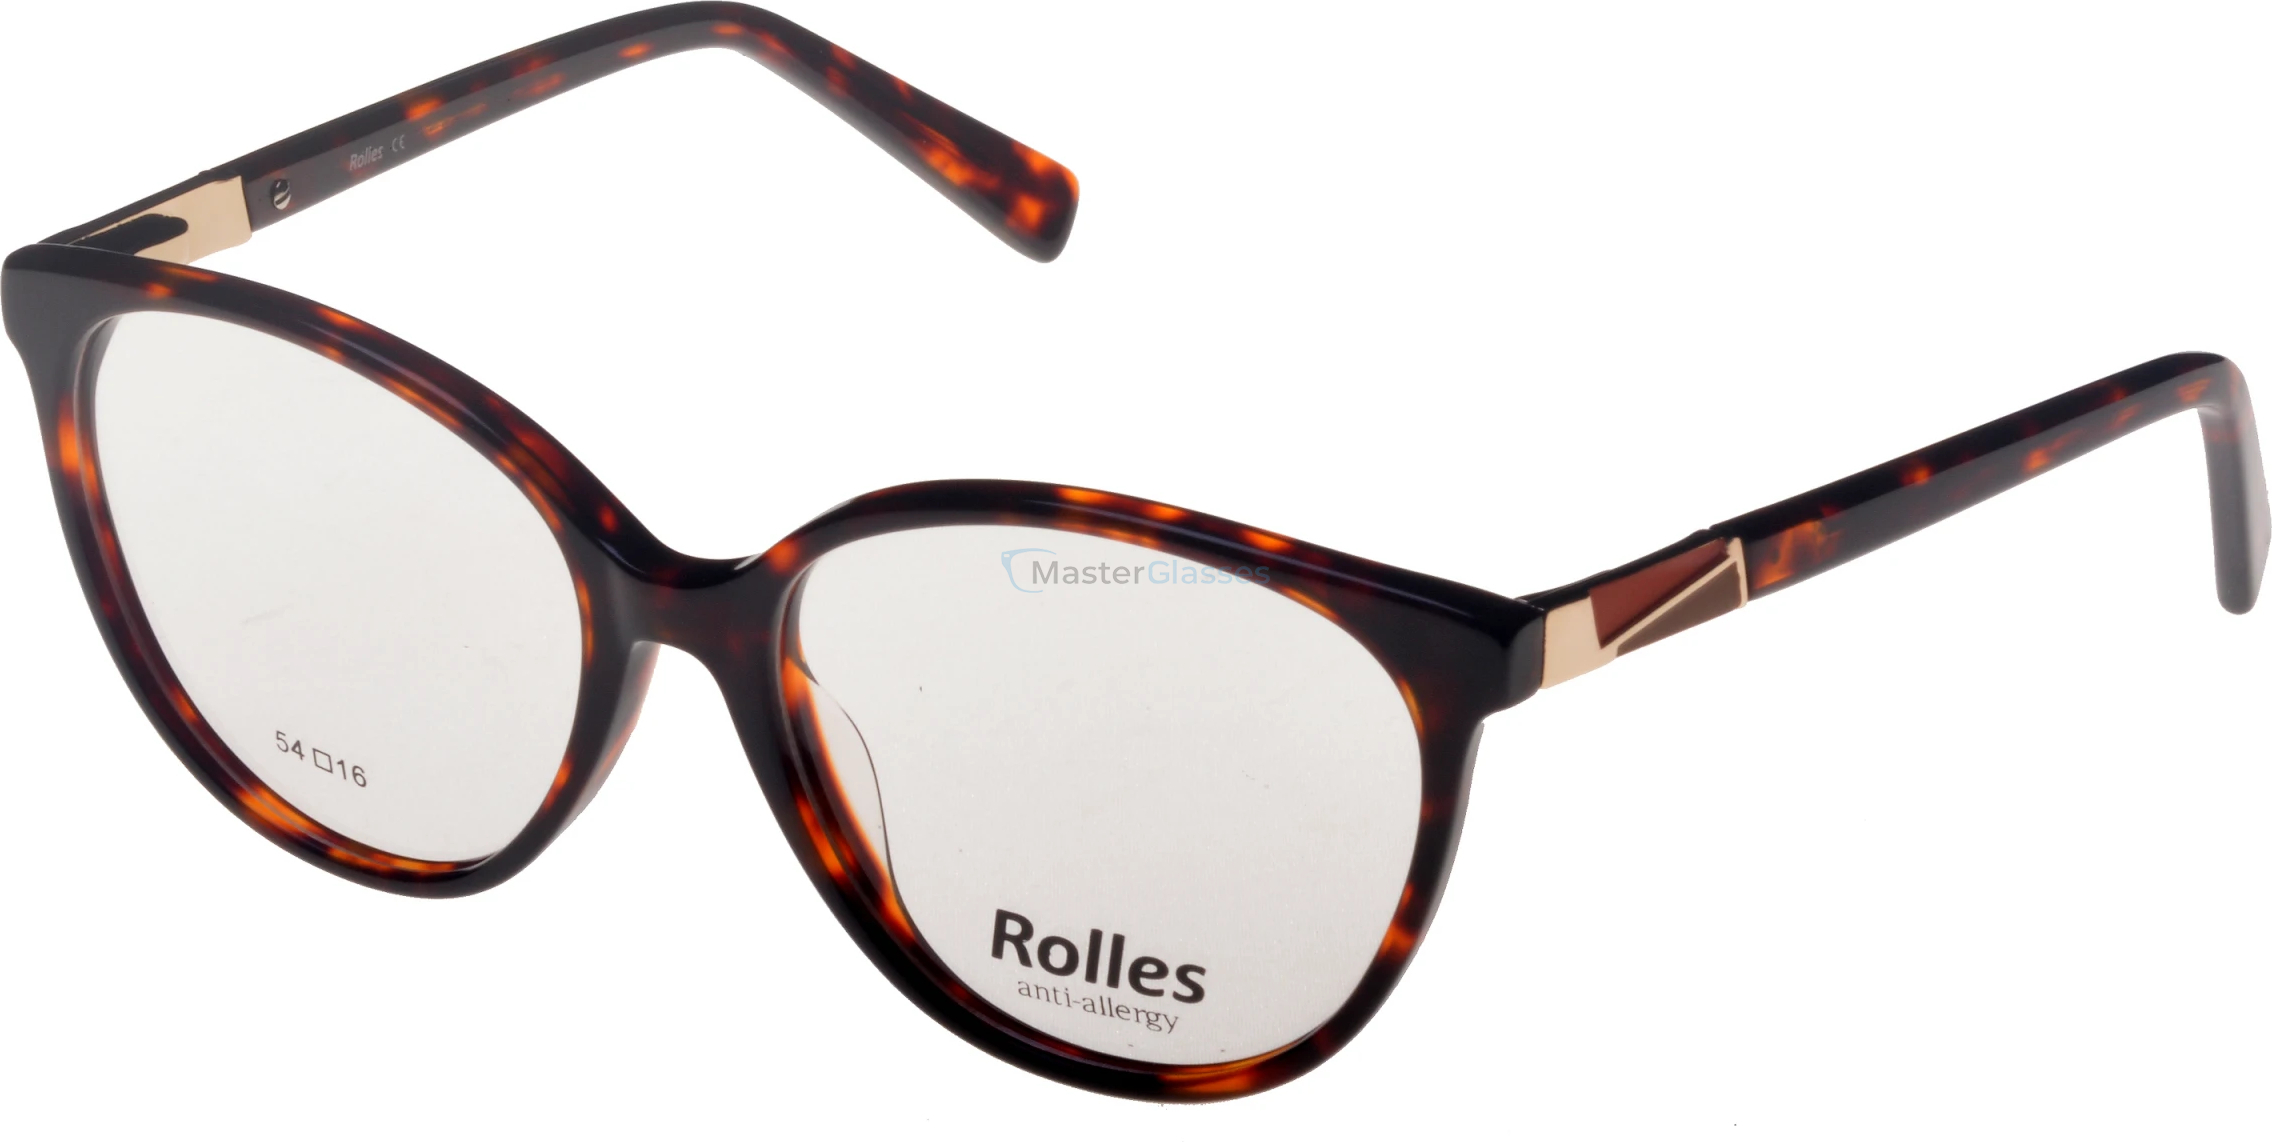  Rolles 709 02